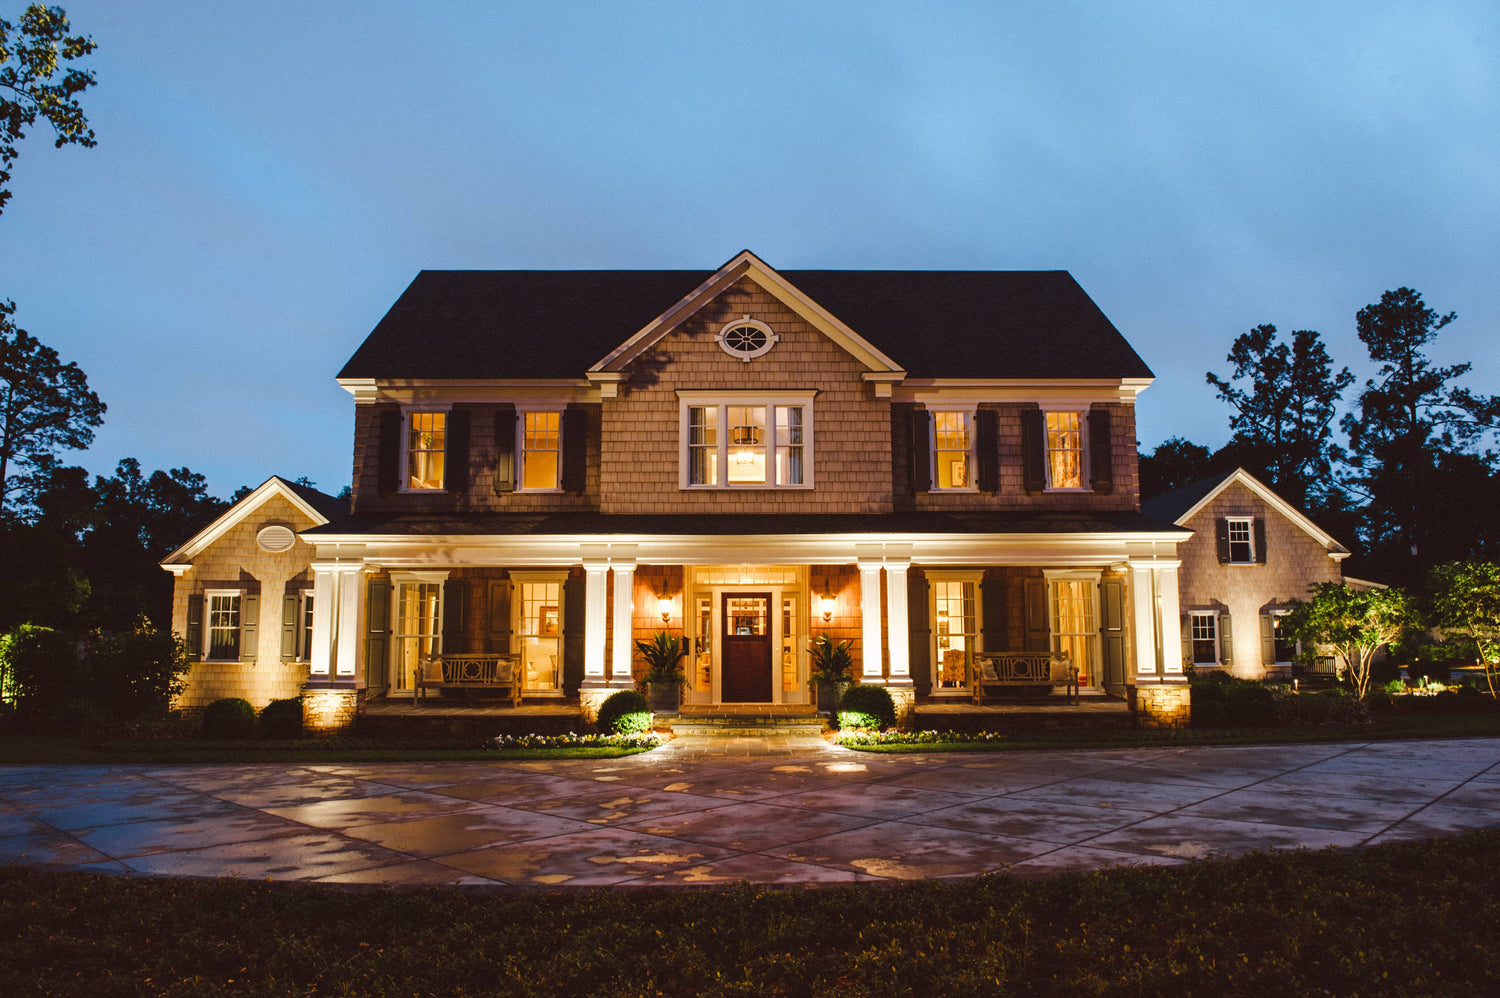 Spot Lights Guide: Illuminate Your Home Exterior & Boost Curb Appeal!